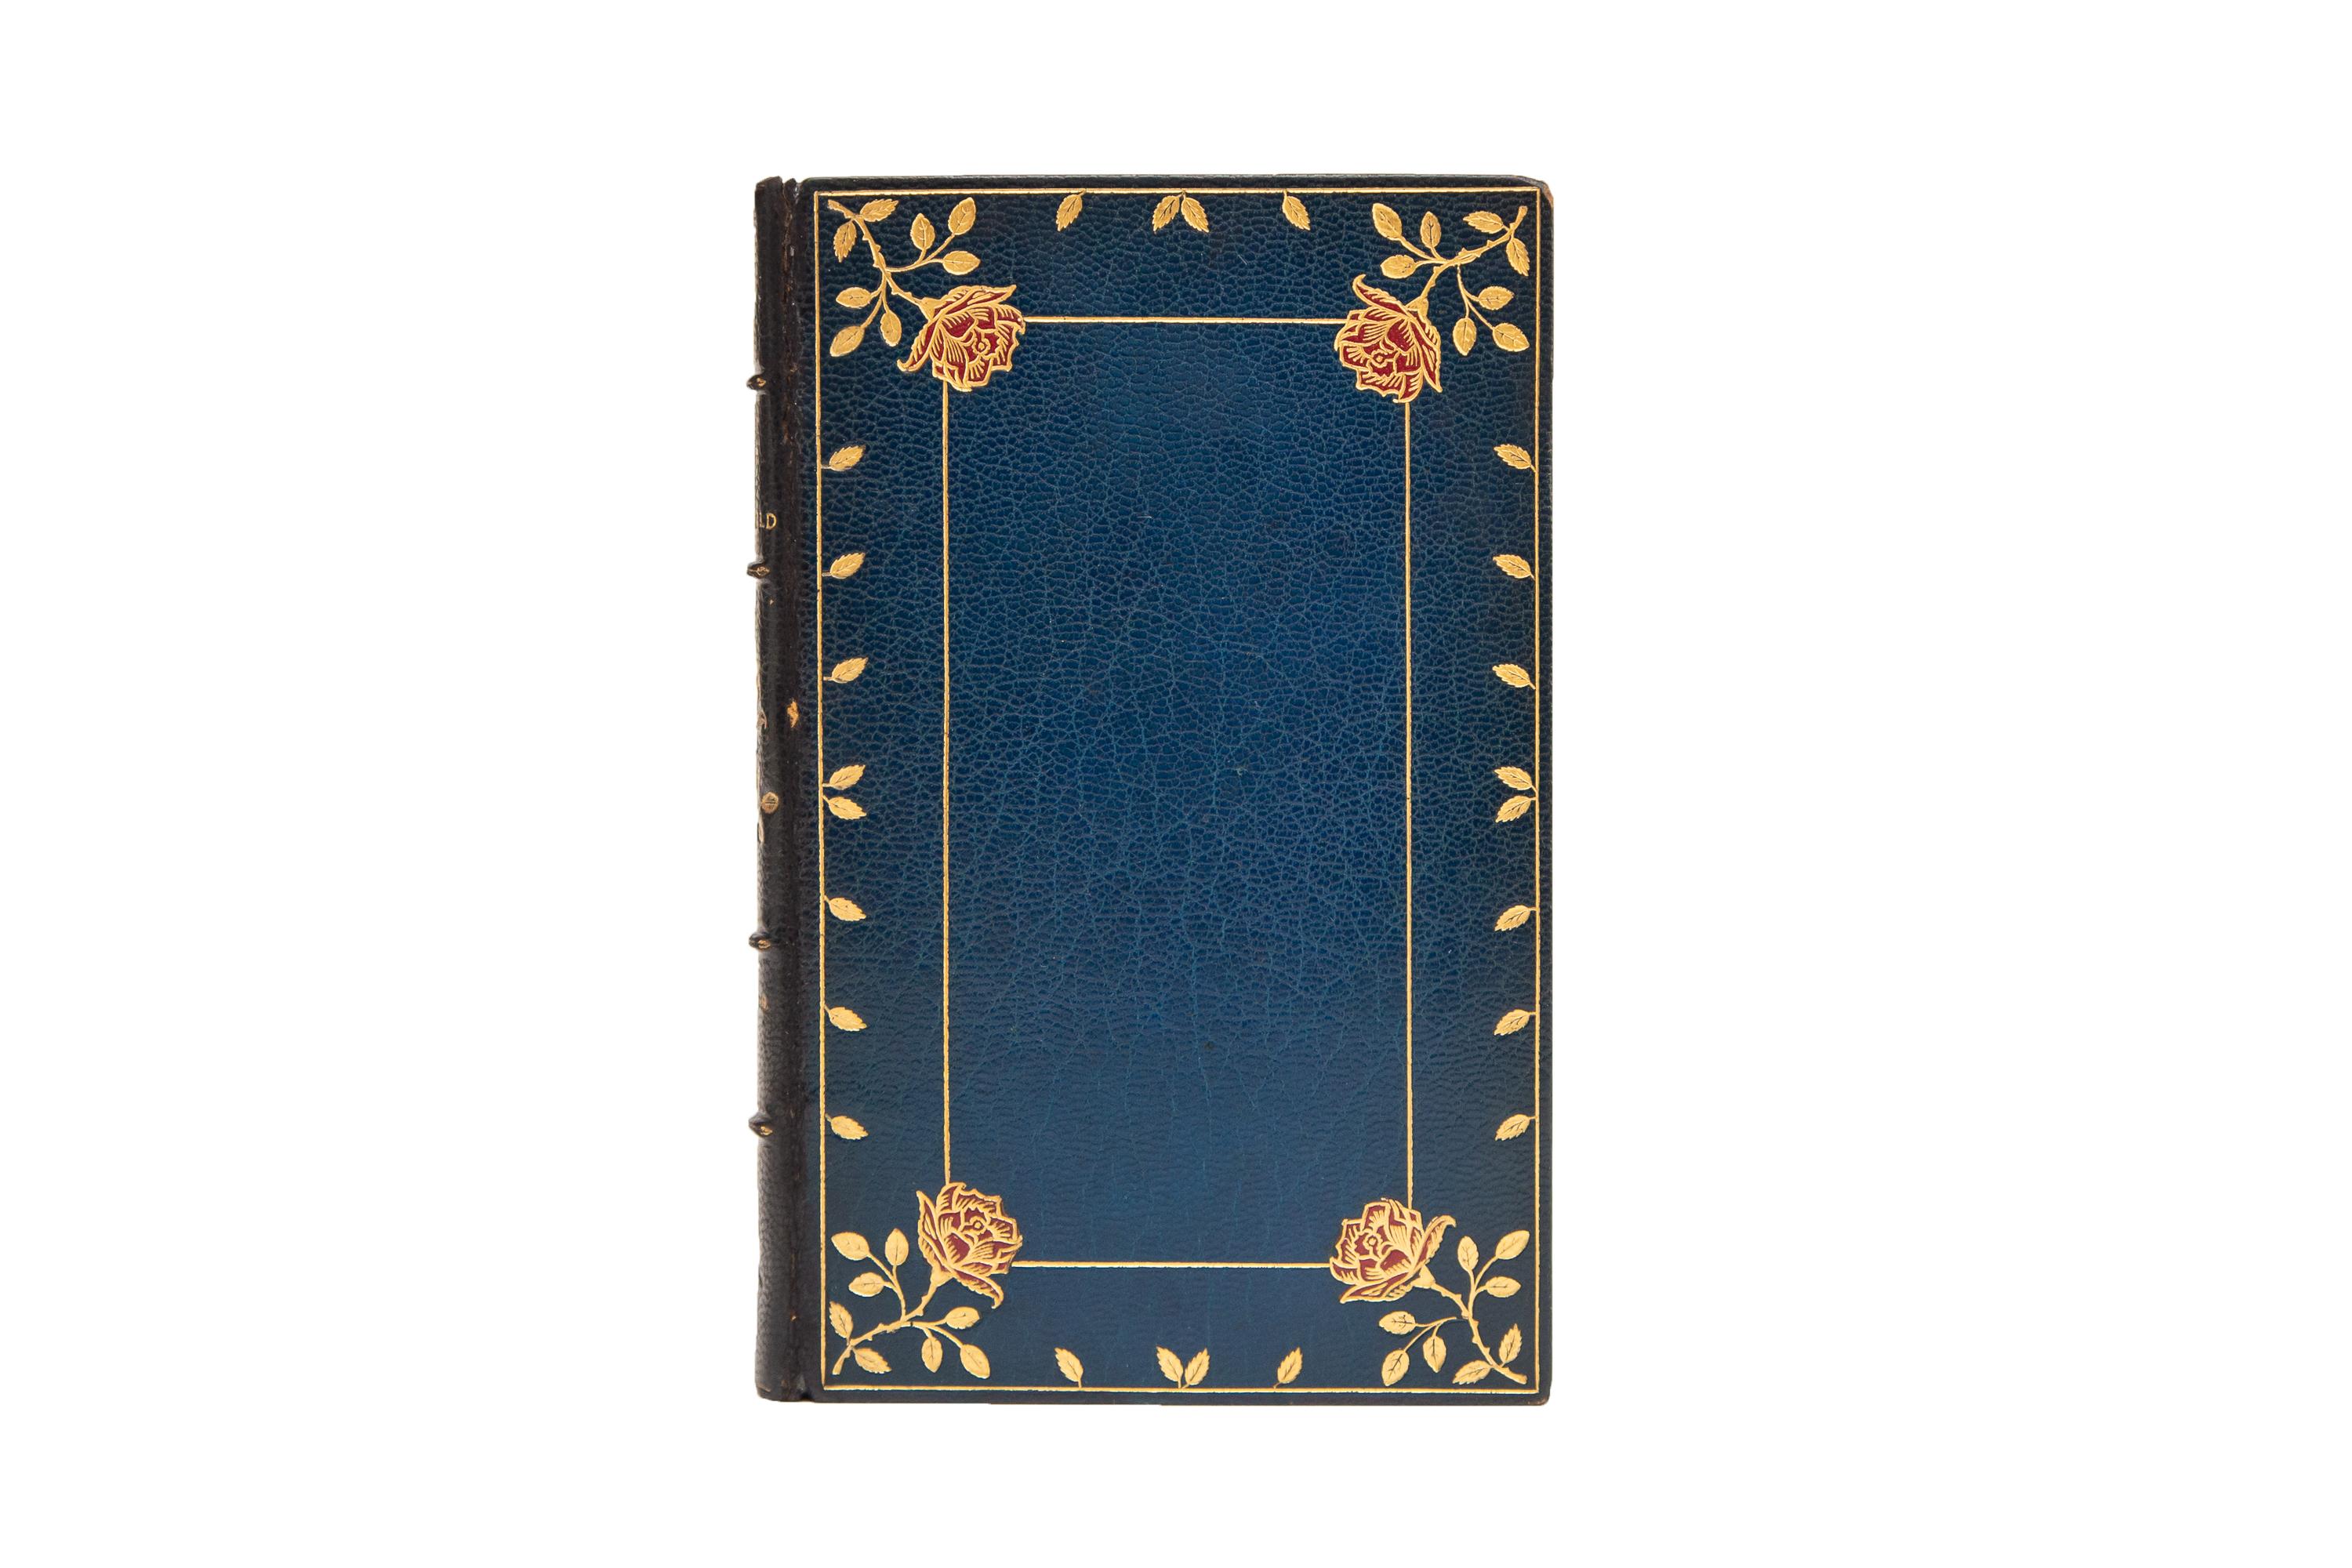 2 Volumes. Oliver Goldsmith, The Vicar of Wakefield. Bound in full blue morocco with beautiful red inlaid roses and floral gilt borders on the covers. Raised band spine gilt with panels displaying gilt detailing, titles, and a red inlaid rose. All